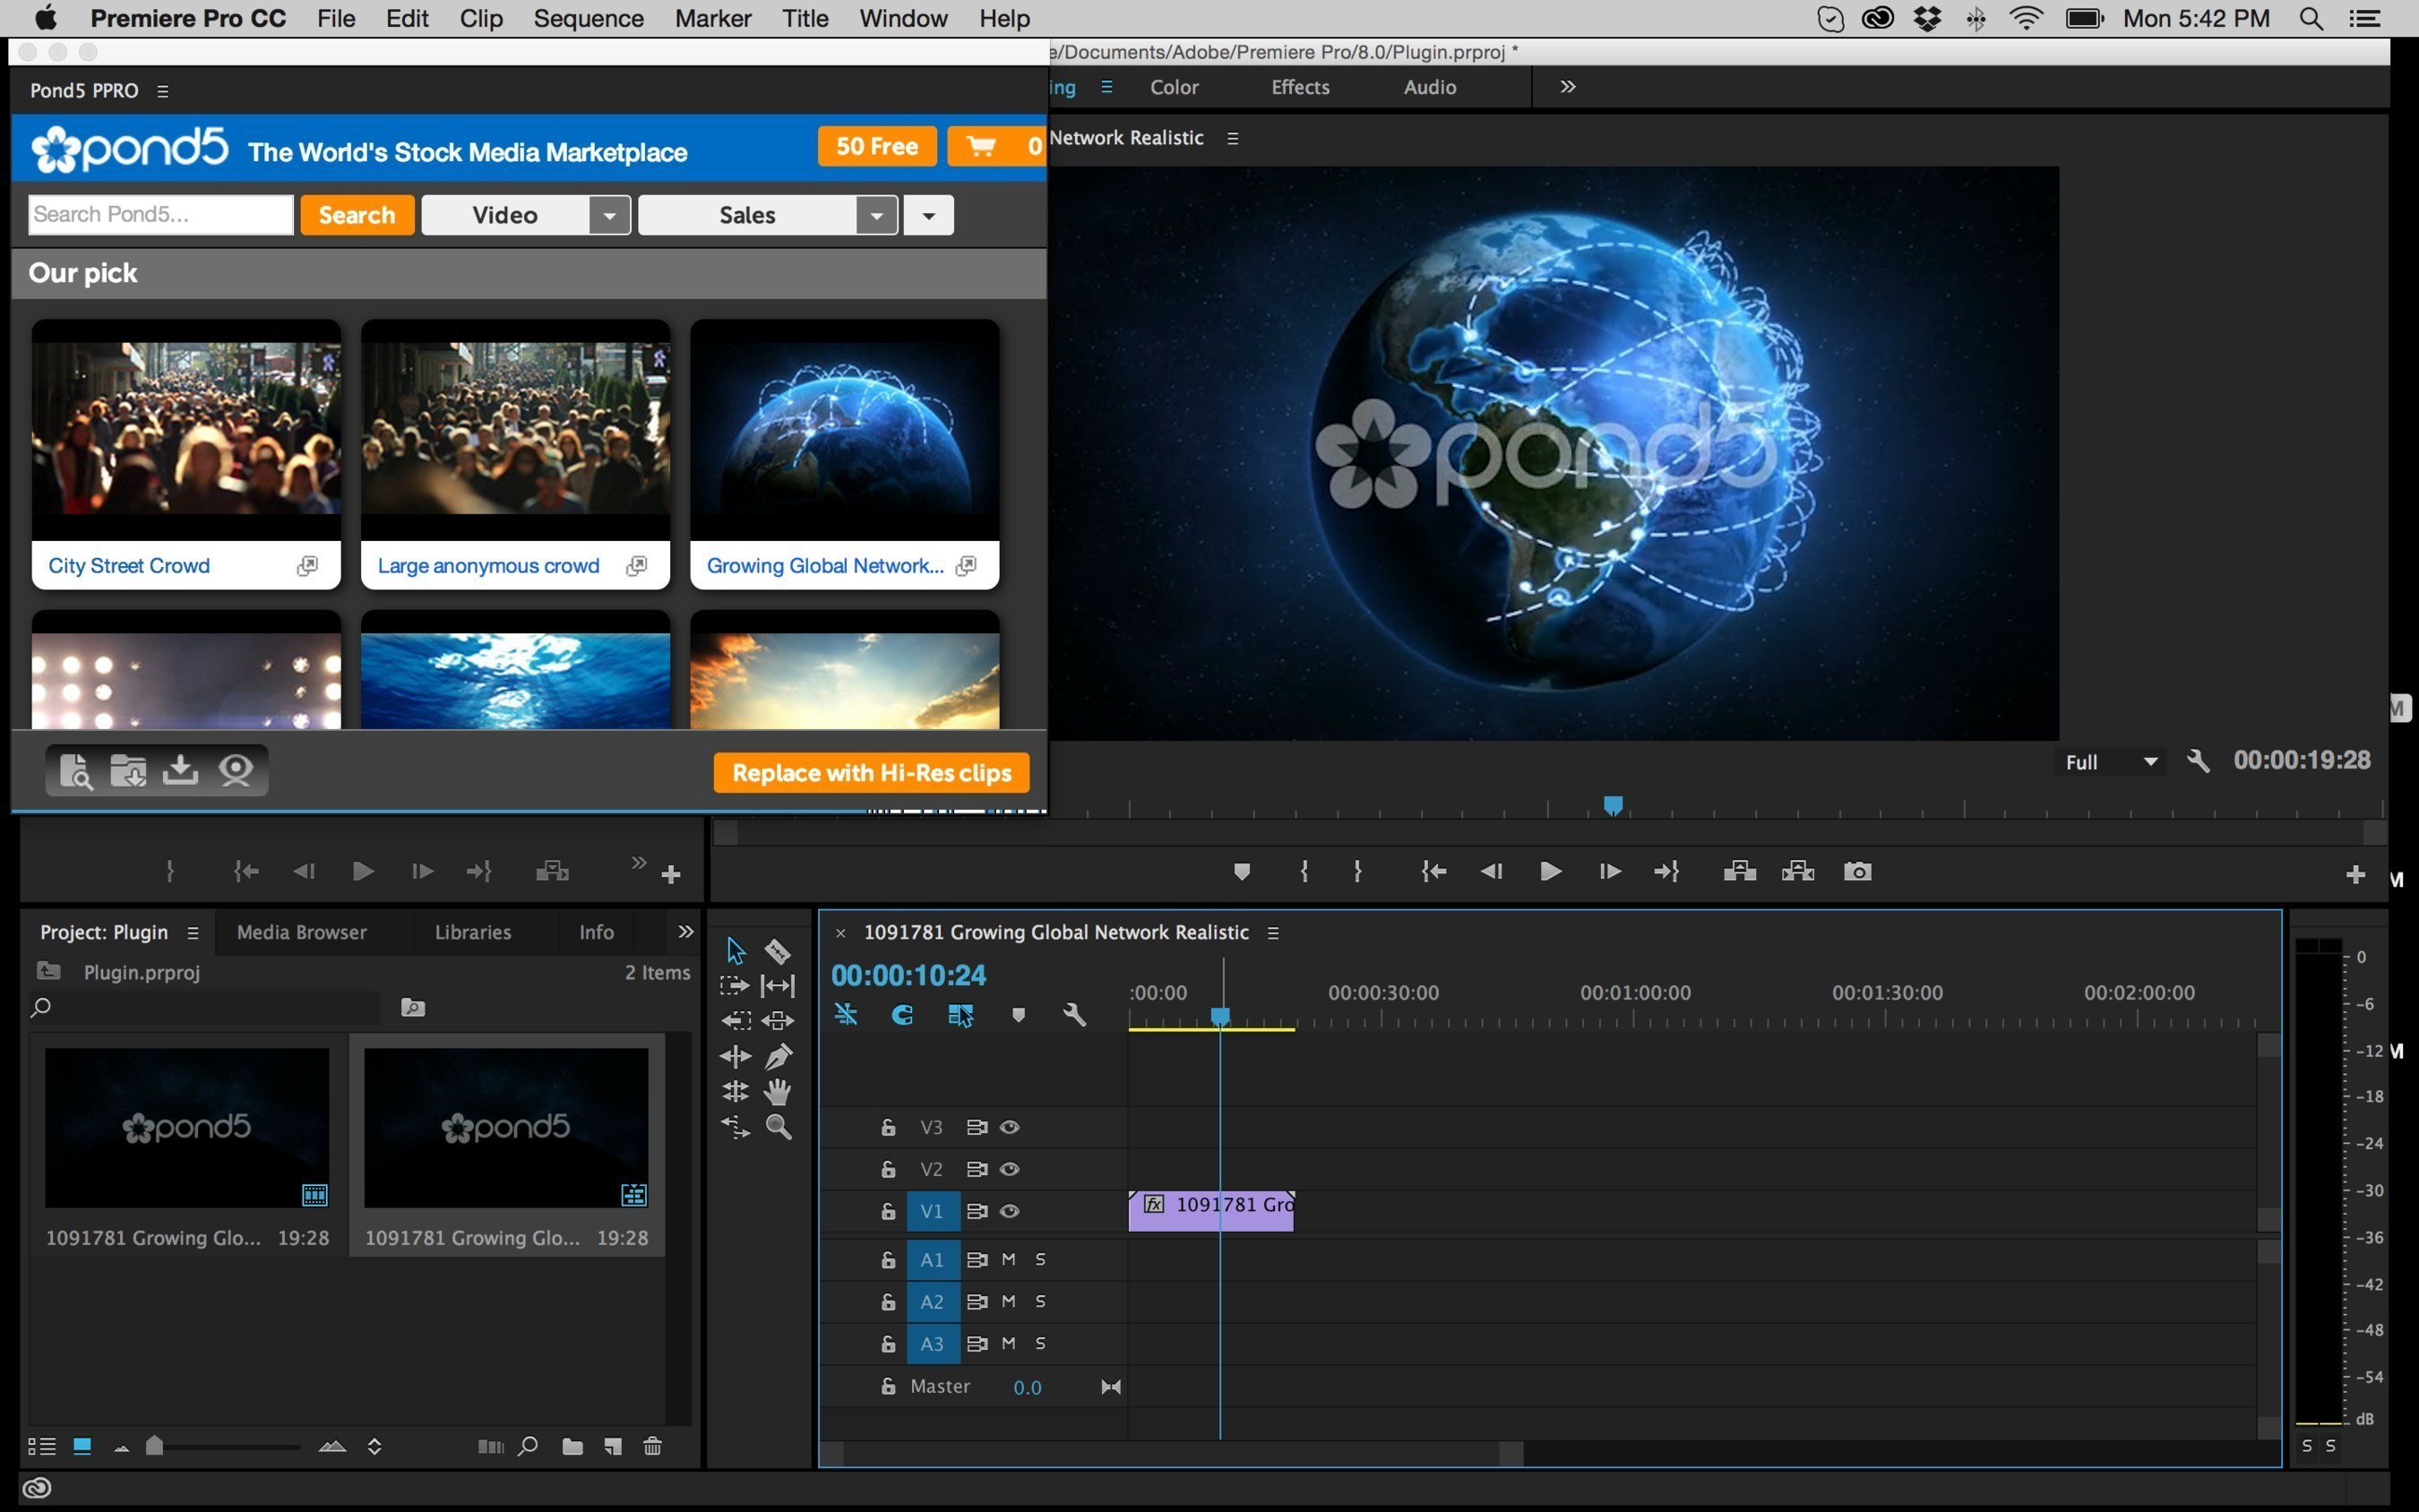 Version 2 of Pond5's Adobe Premiere Pro plugin features faster search, instant checkout, and access to thousands of free public domain video clips.